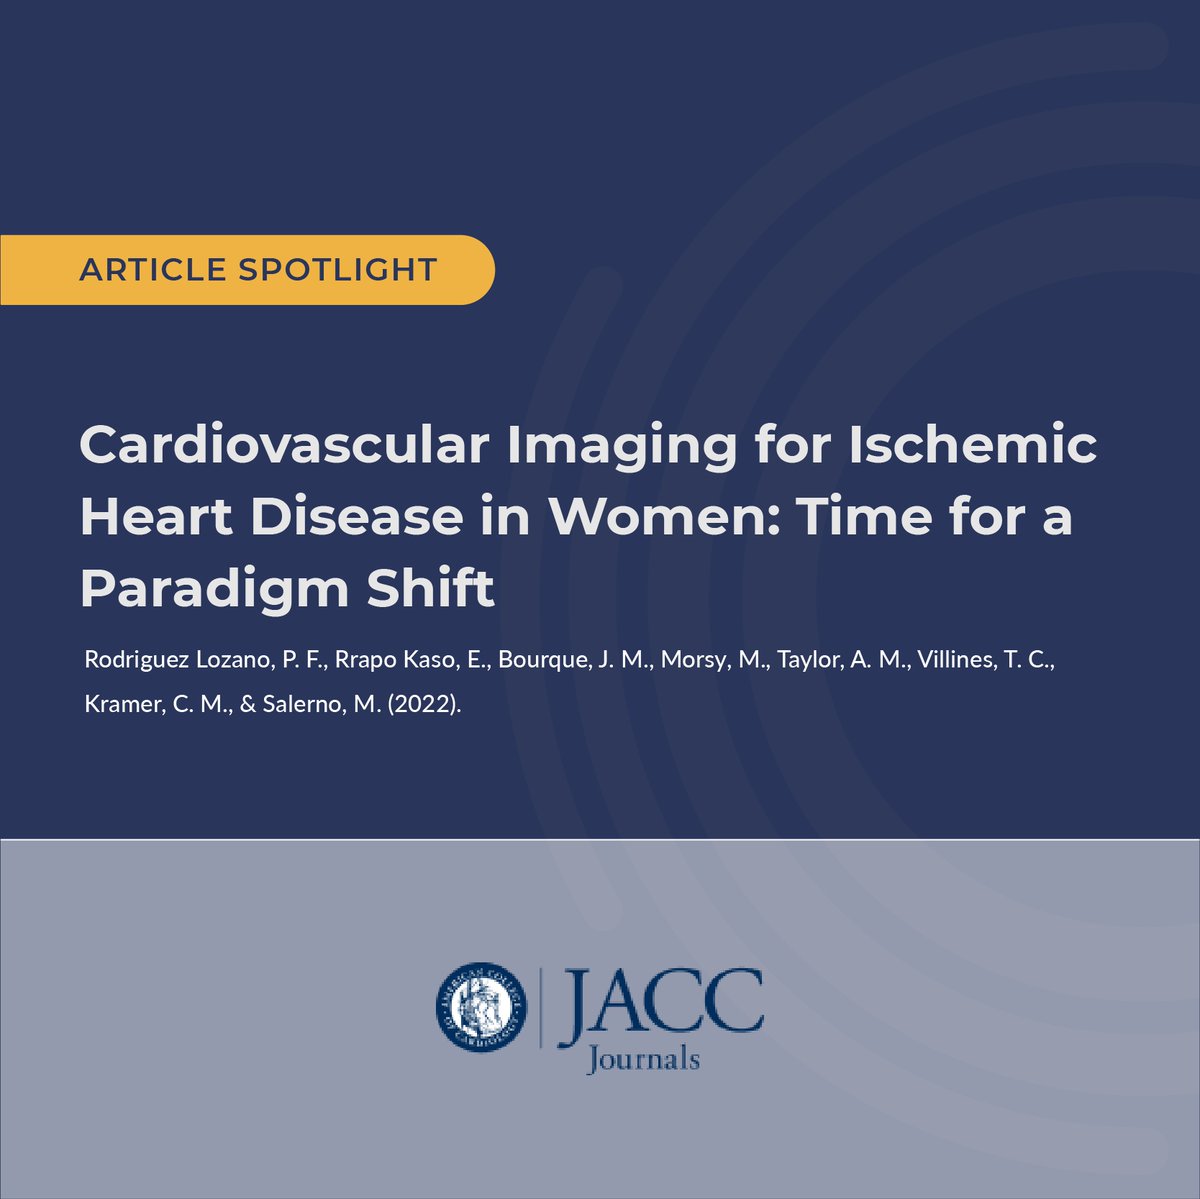 Ischemic heart disease presents differently in women than men. Unfortunately, current risk models that are used for data-driven assessments don't account for these differences and need to be updated to ensure equitable access to proper care and treatme... bit.ly/3DqQRLo